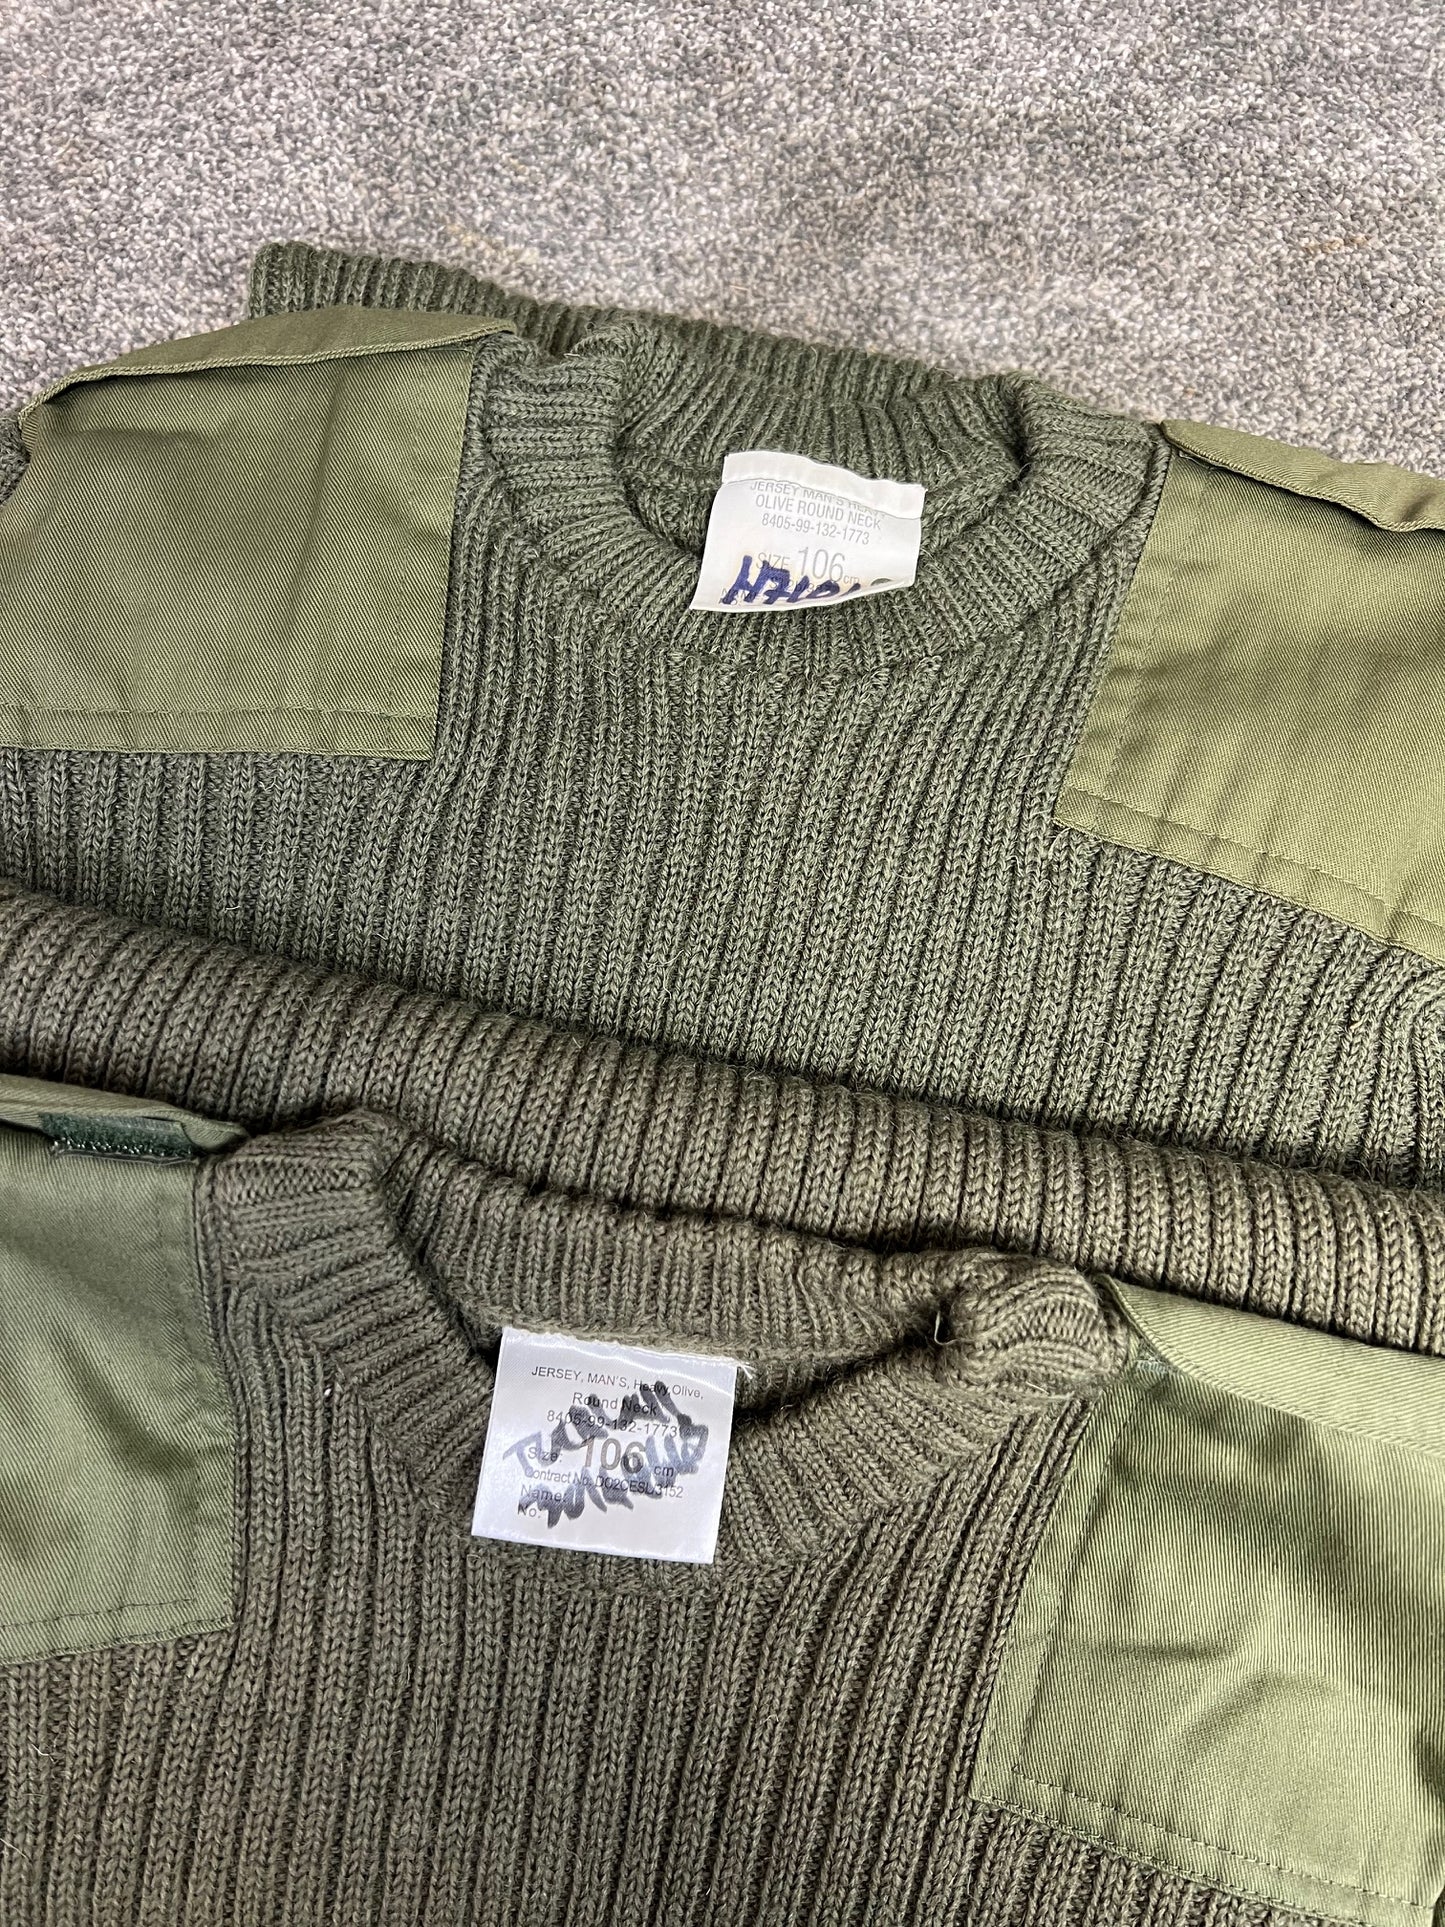 6x Genuine British Army Wool Jumper Military Olive Pullover Job Lot Bundle - Mixed Sizes